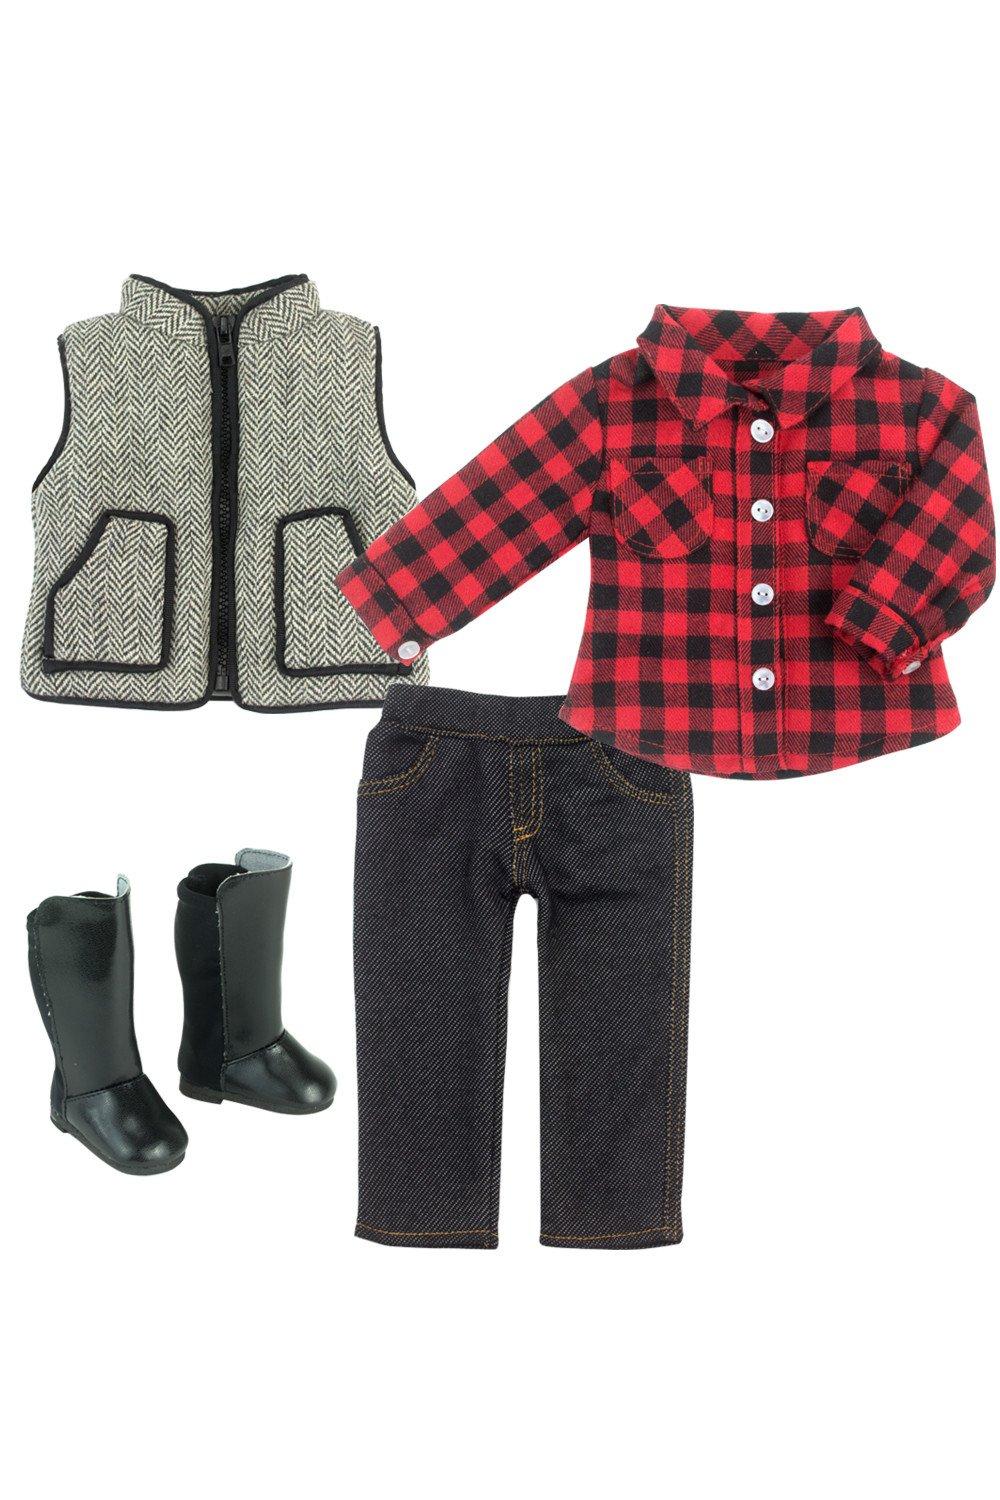 Sophia’s18" Doll Checked Shirt, Country Gilet & Jeggings with Boots